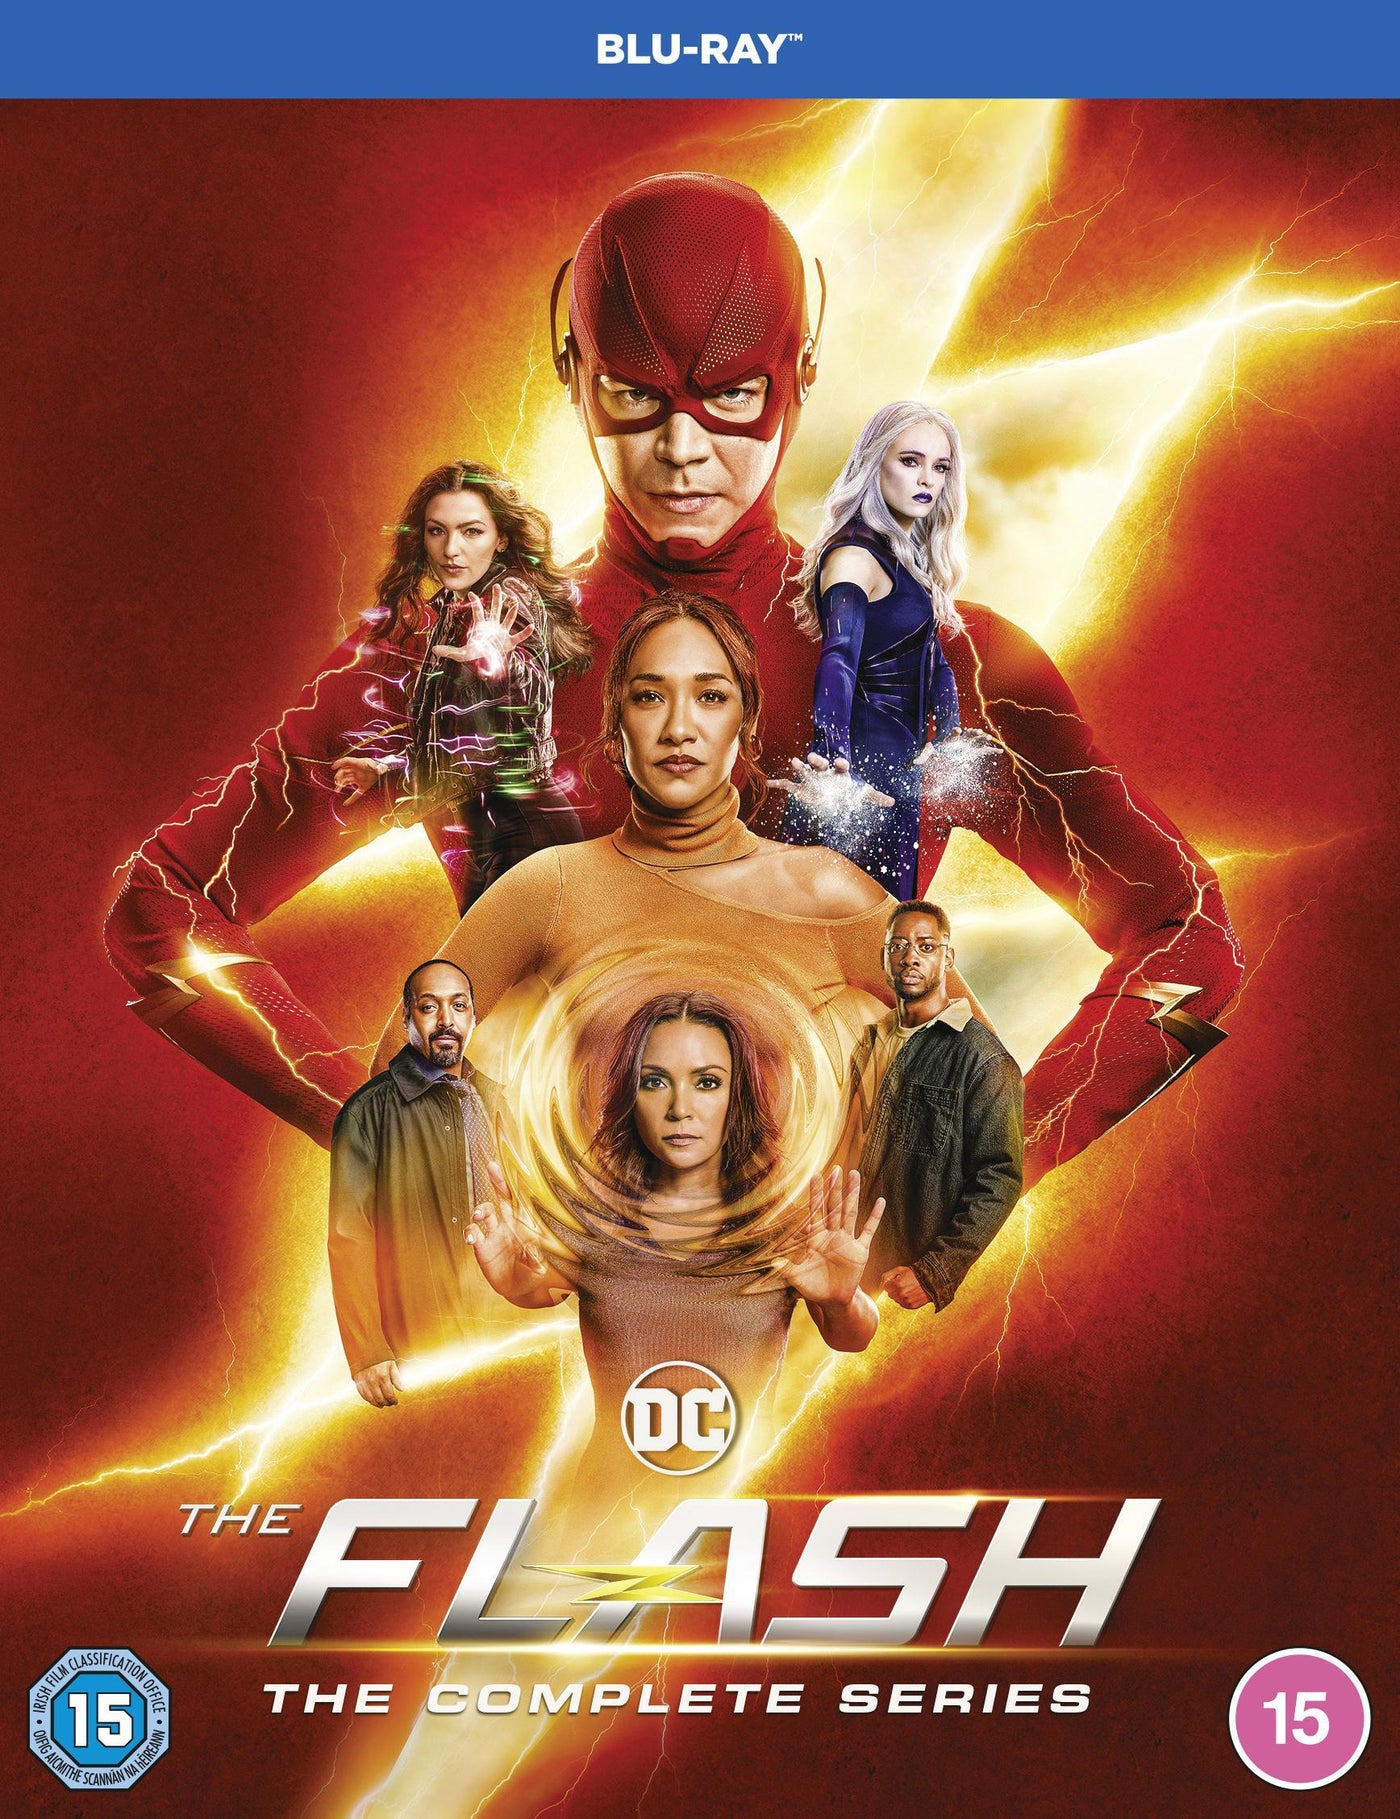 The Flash: The Complete Series [Blu-ray] [2014]